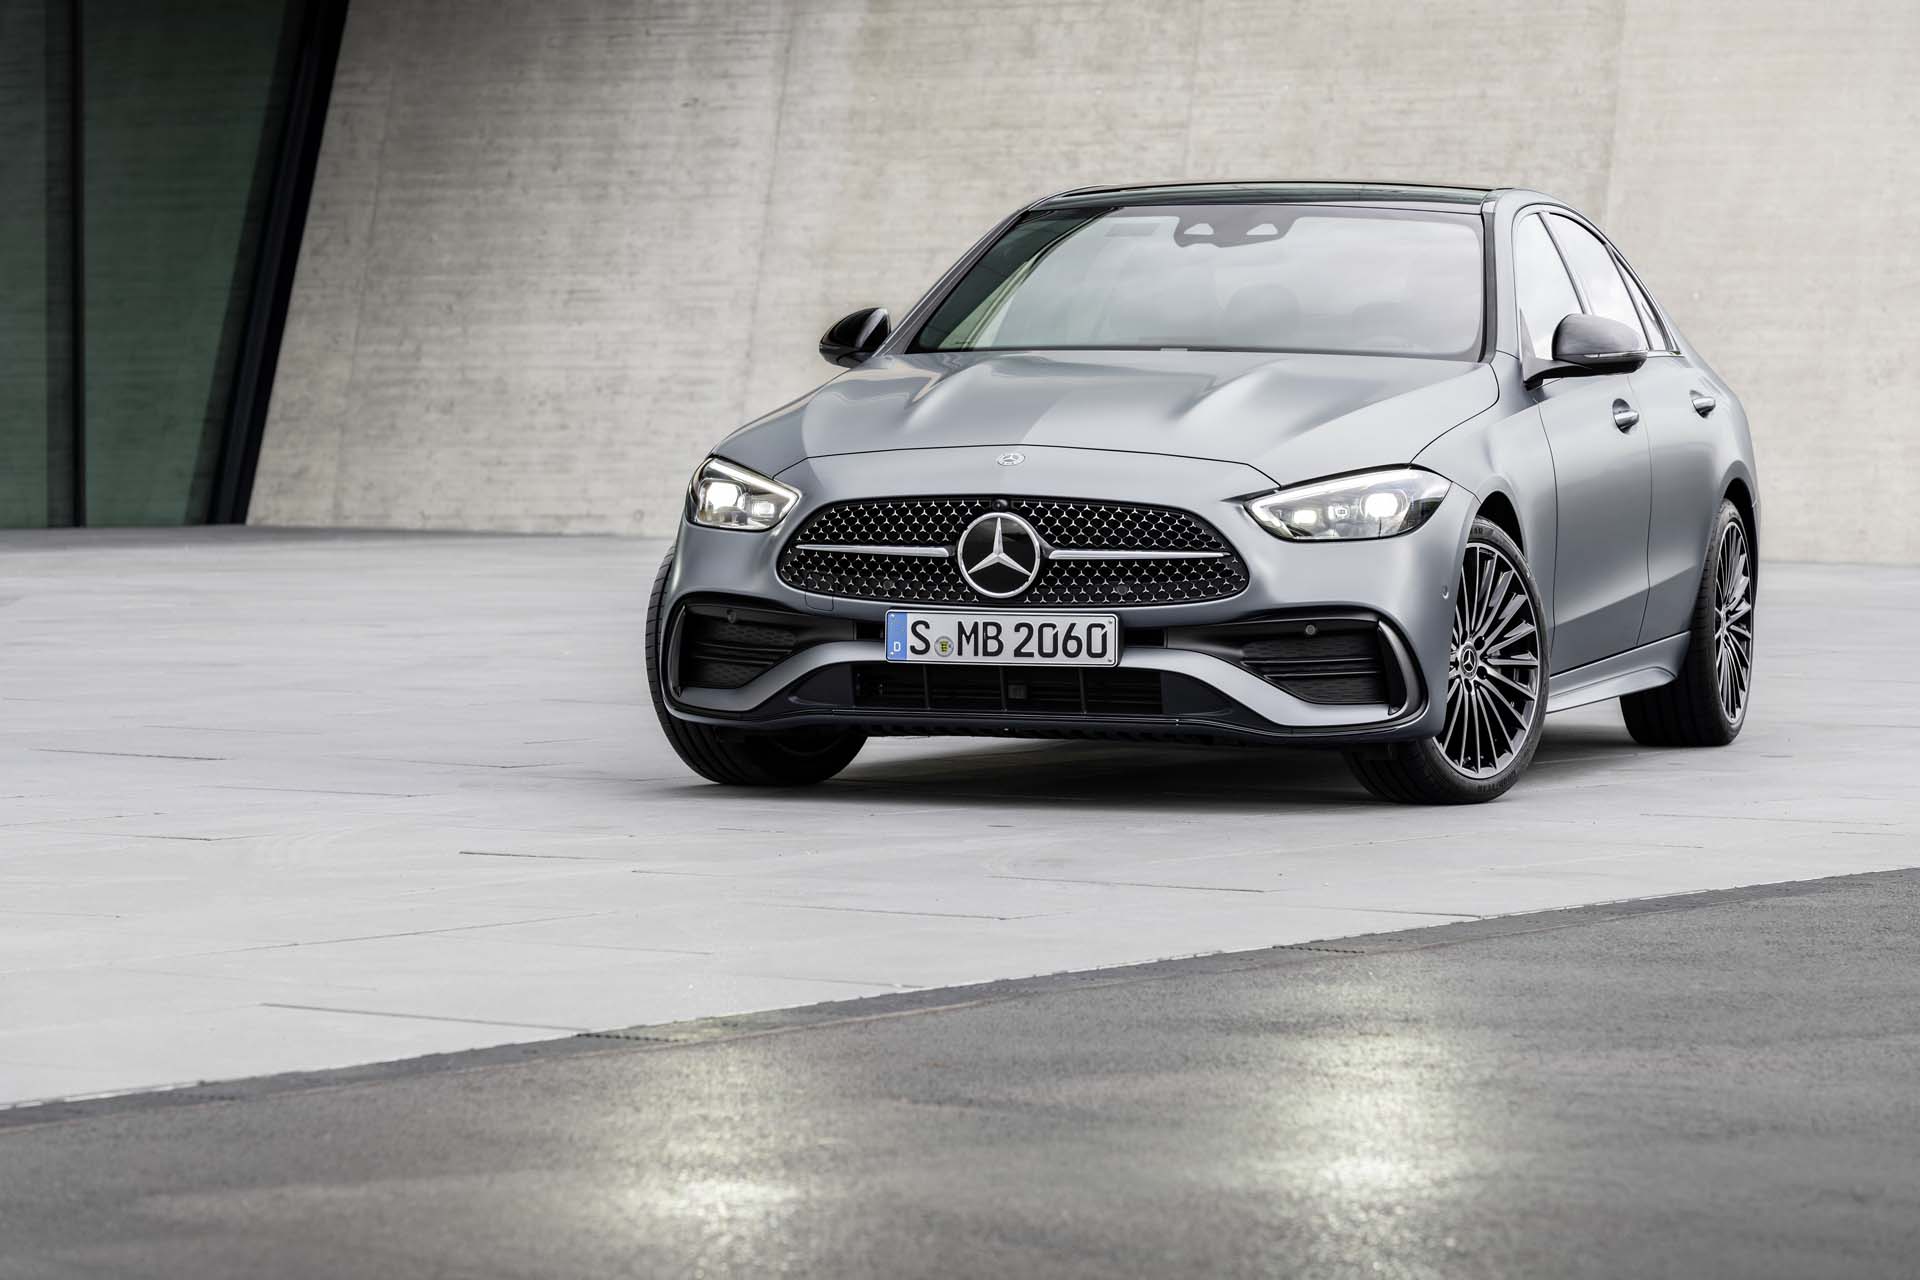 Next Mercedes Benz Amg C63 Will Reportedly Be A Plug In Hybrid With A 4 Cylinder 550 Hp